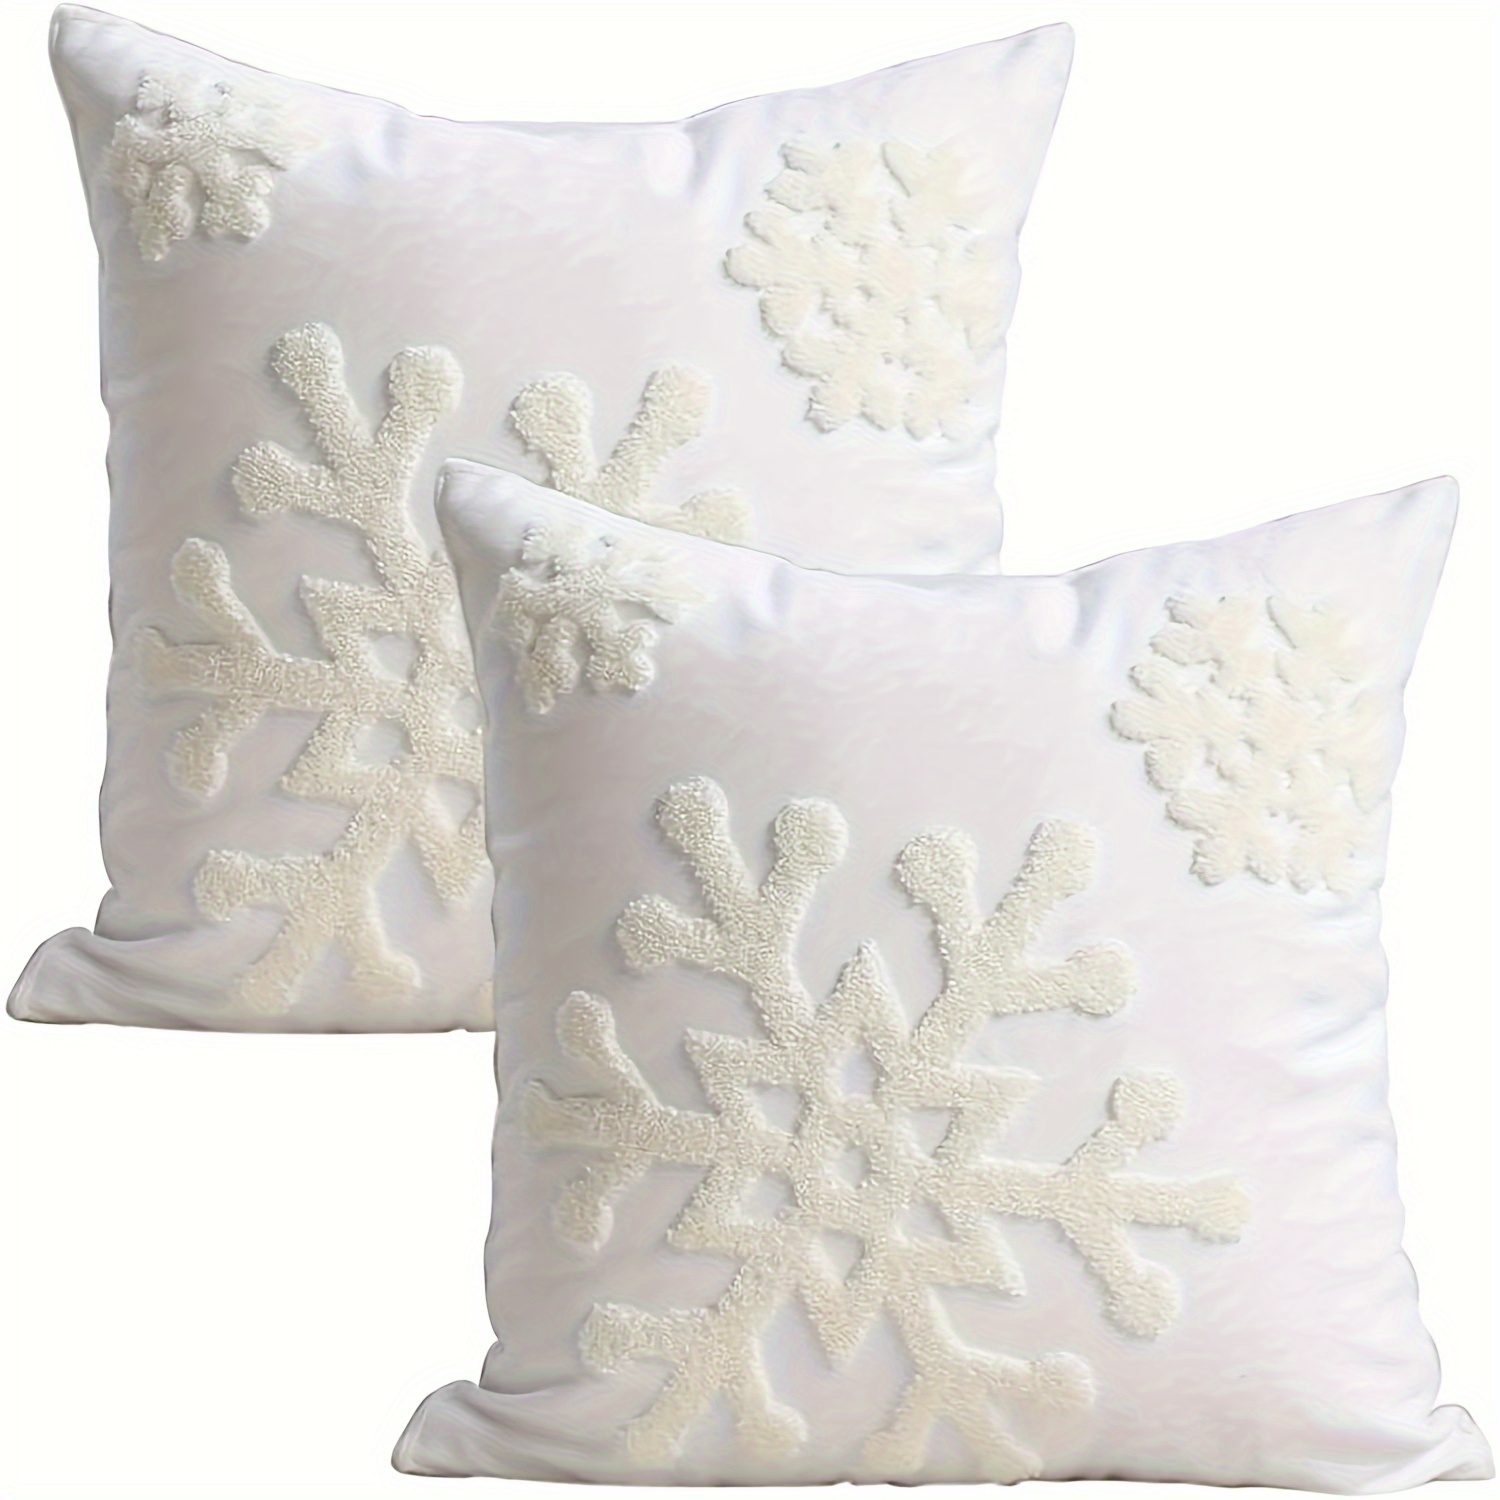 

18x18 Soft Canvas Christmas Winter Snowflake Style Cotton Linen Embroidery Throw Pillows Covers W/invisible Zipper For Bed Sofa Cushion Pillowcases For Bedding (1 Pair, White)